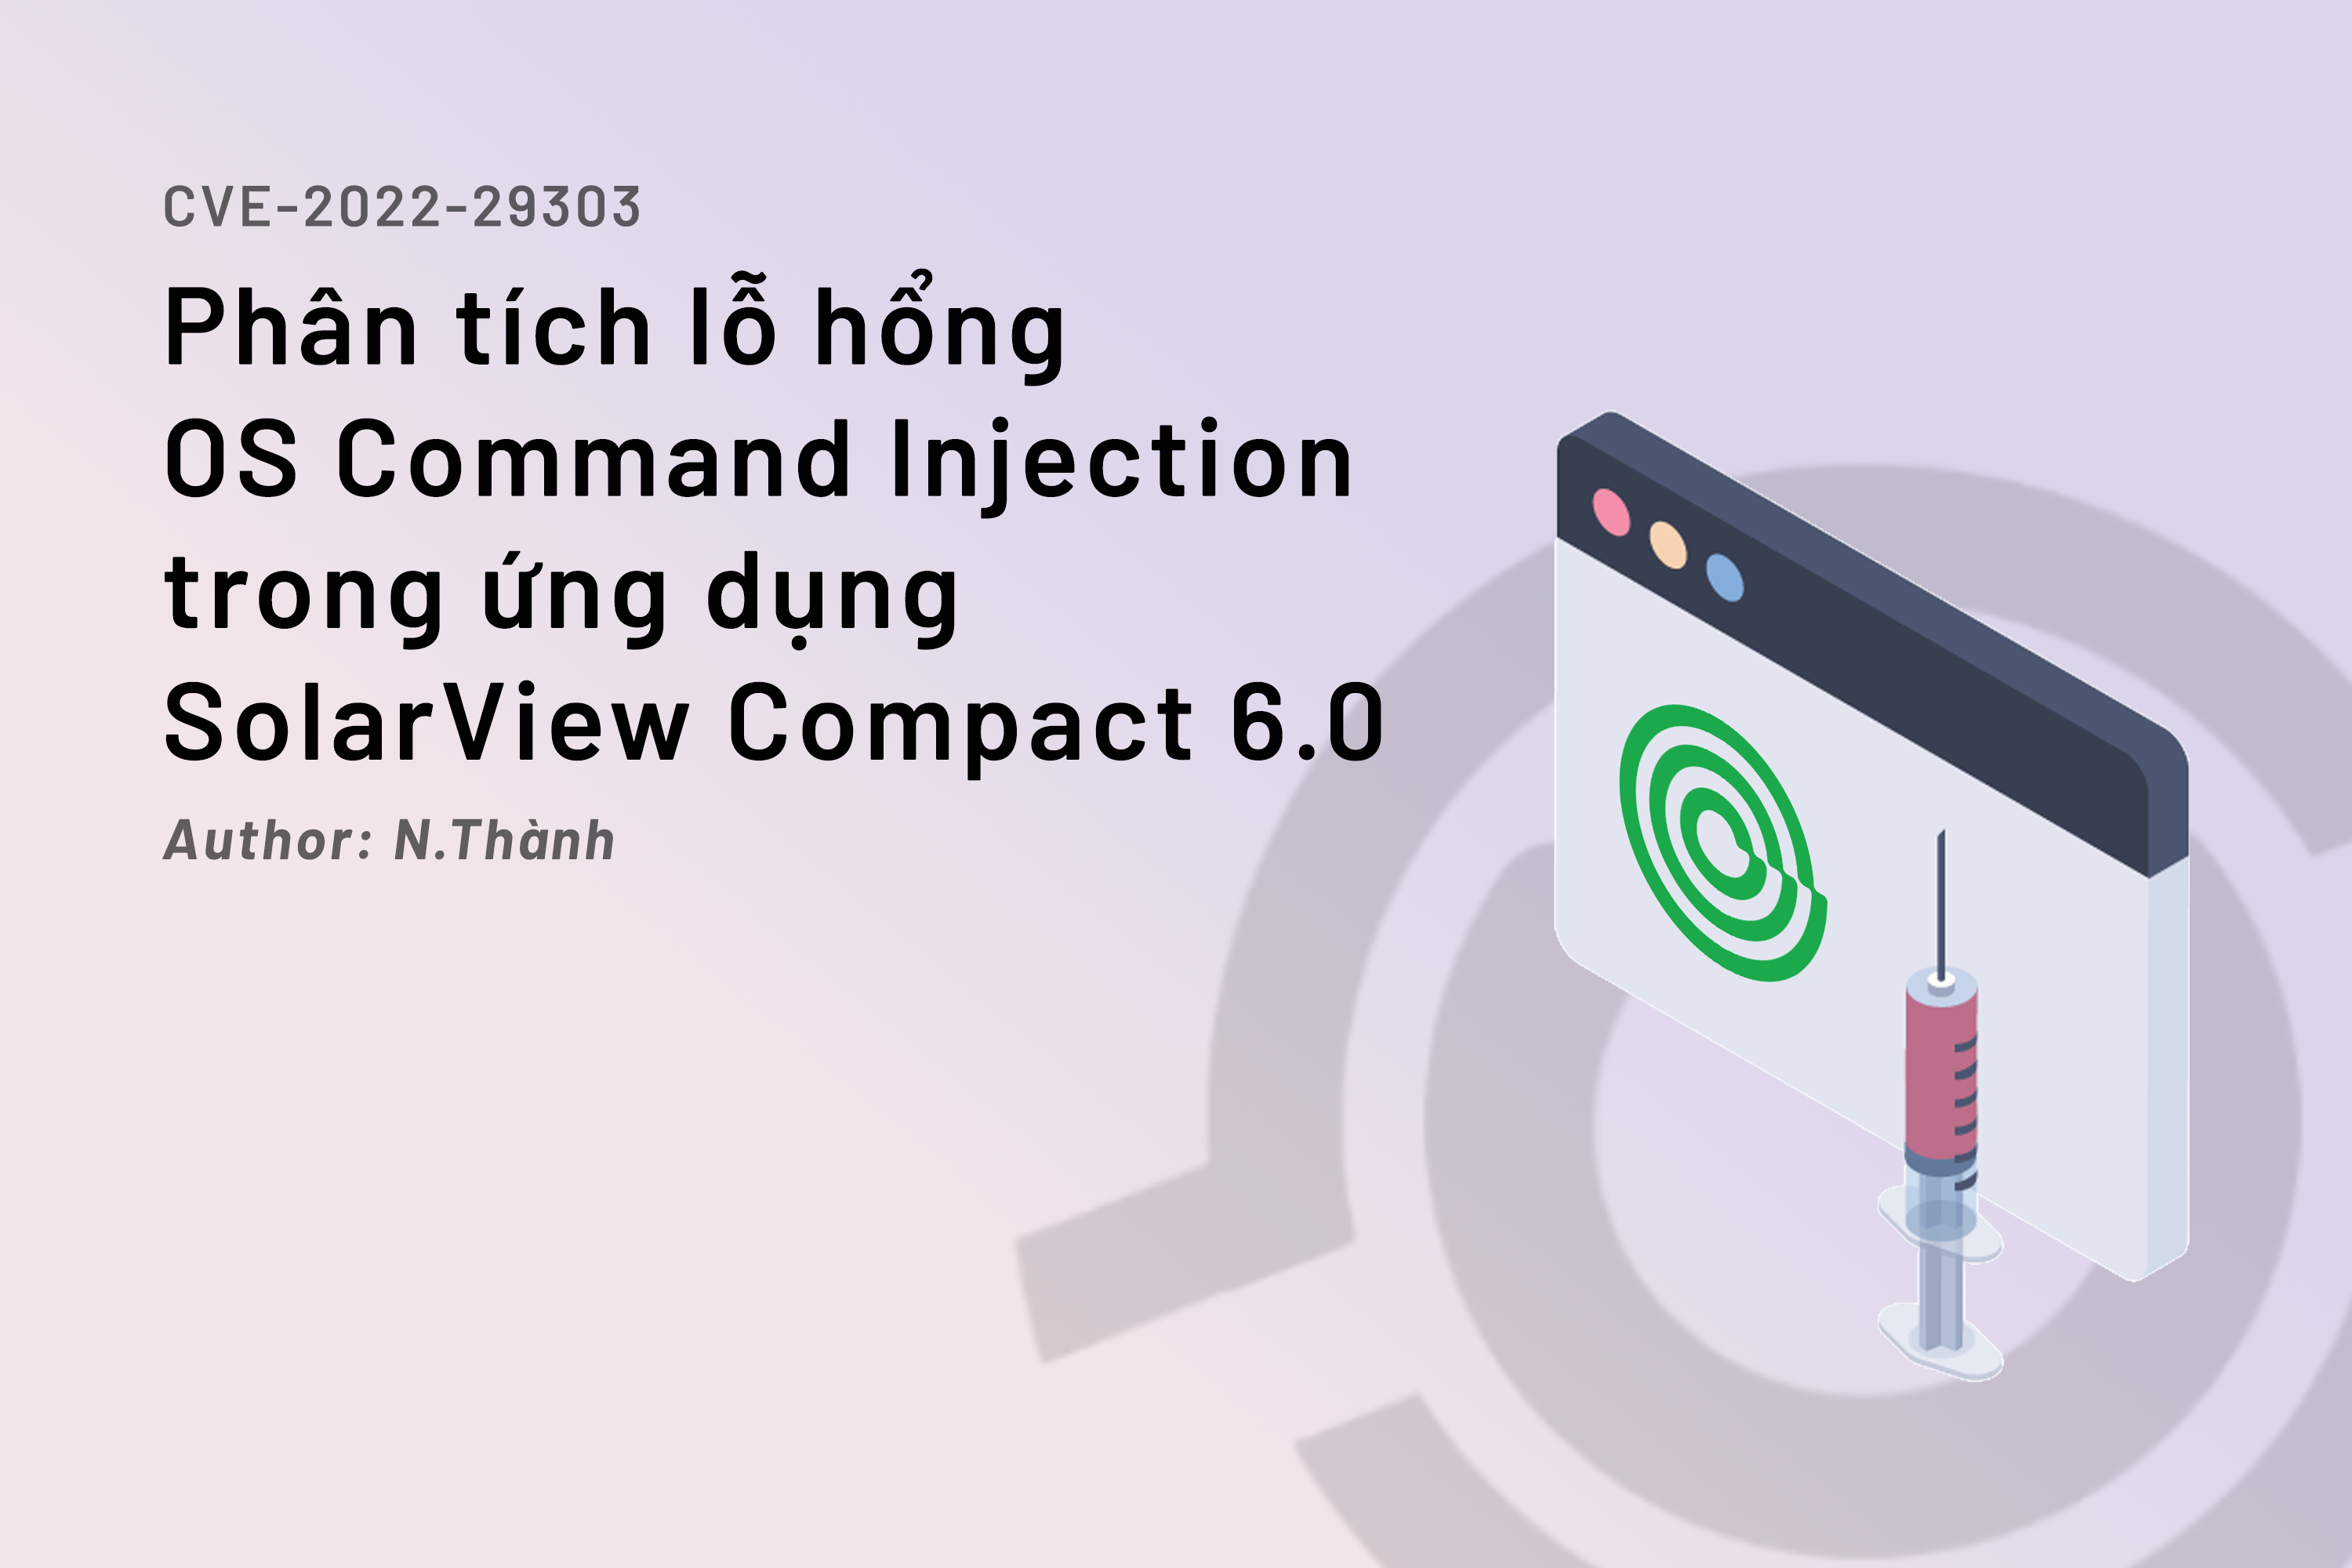 Phân tích lỗ hổng OS Command Injection trong ứng dụng SolarView Compact 6.0